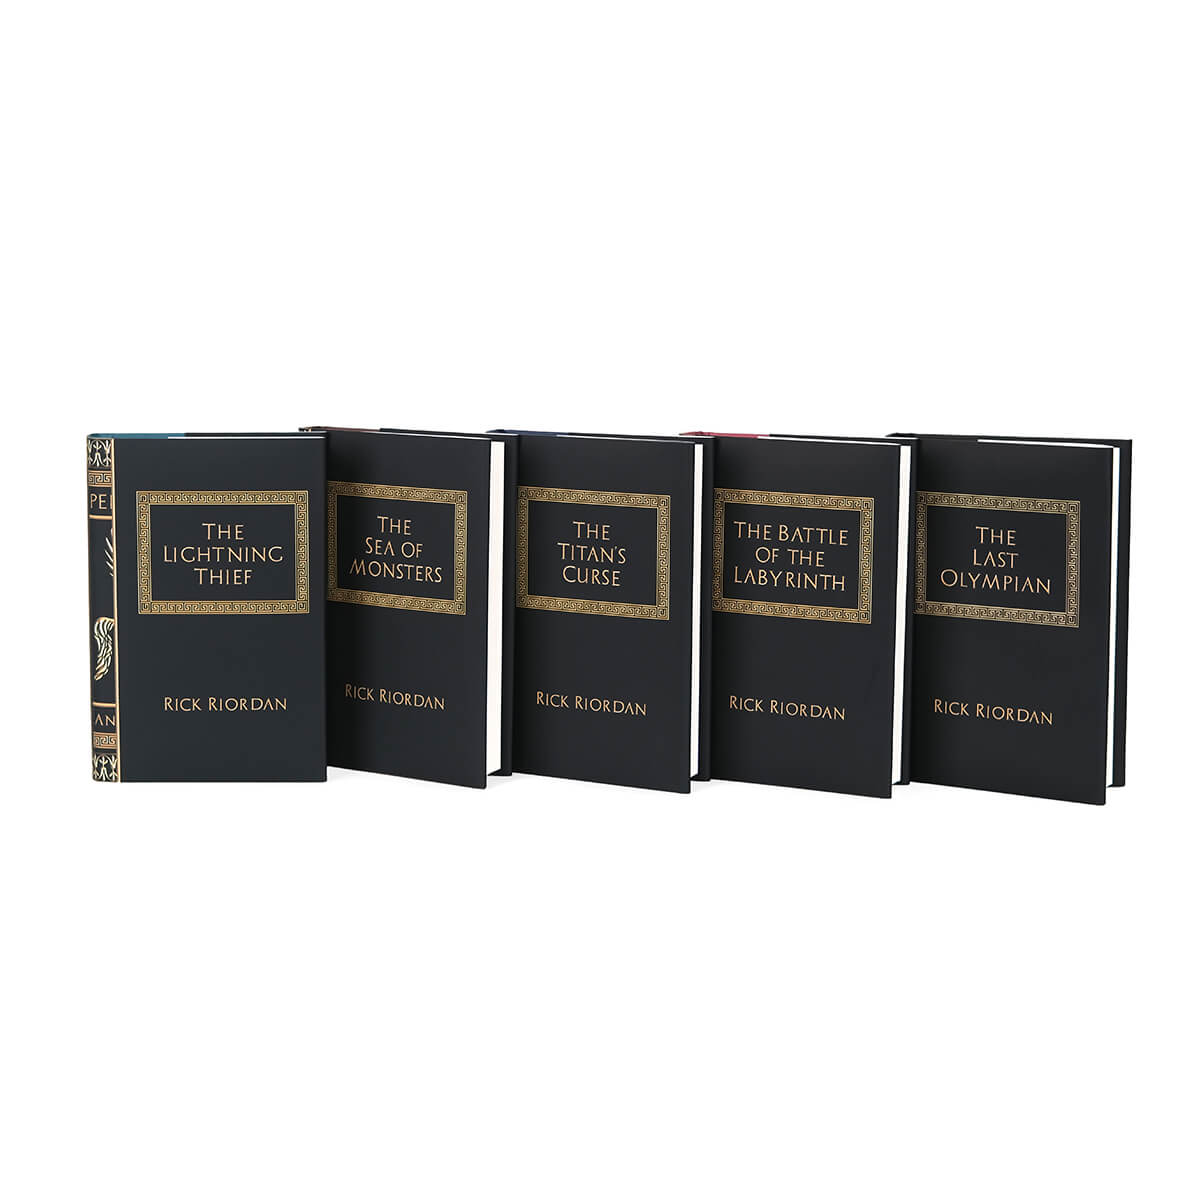 Custom collectible dust jackets for Percy Jackson and the Olympians by Juniper Custom. Black covers feature embossed style ornaments, book title, and author name. 